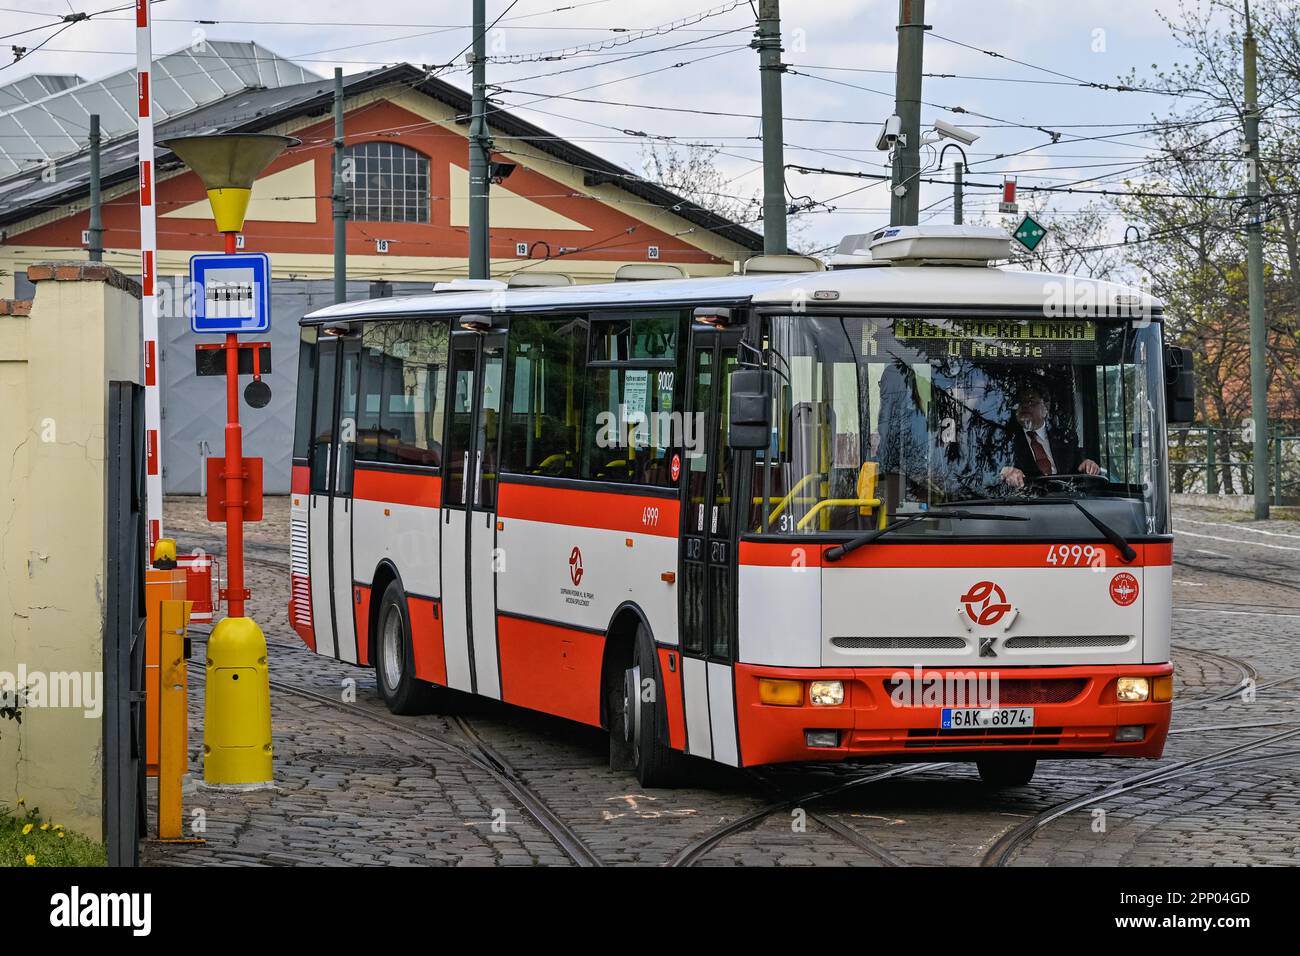 The Prague Public Transit Company has introduced a new historic bus line marked with the letter K running along the route of the original trolleybus line of the same name, which ran from August 1936 to 1959 between Stresovice and Svaty Matej in Dejvice. Karosa B951 bus with registration number 4999 from 2004 is pictured in Prague, Czech Republic, April 21, 2023. (CTK Photo/Vit Simanek) Stock Photo